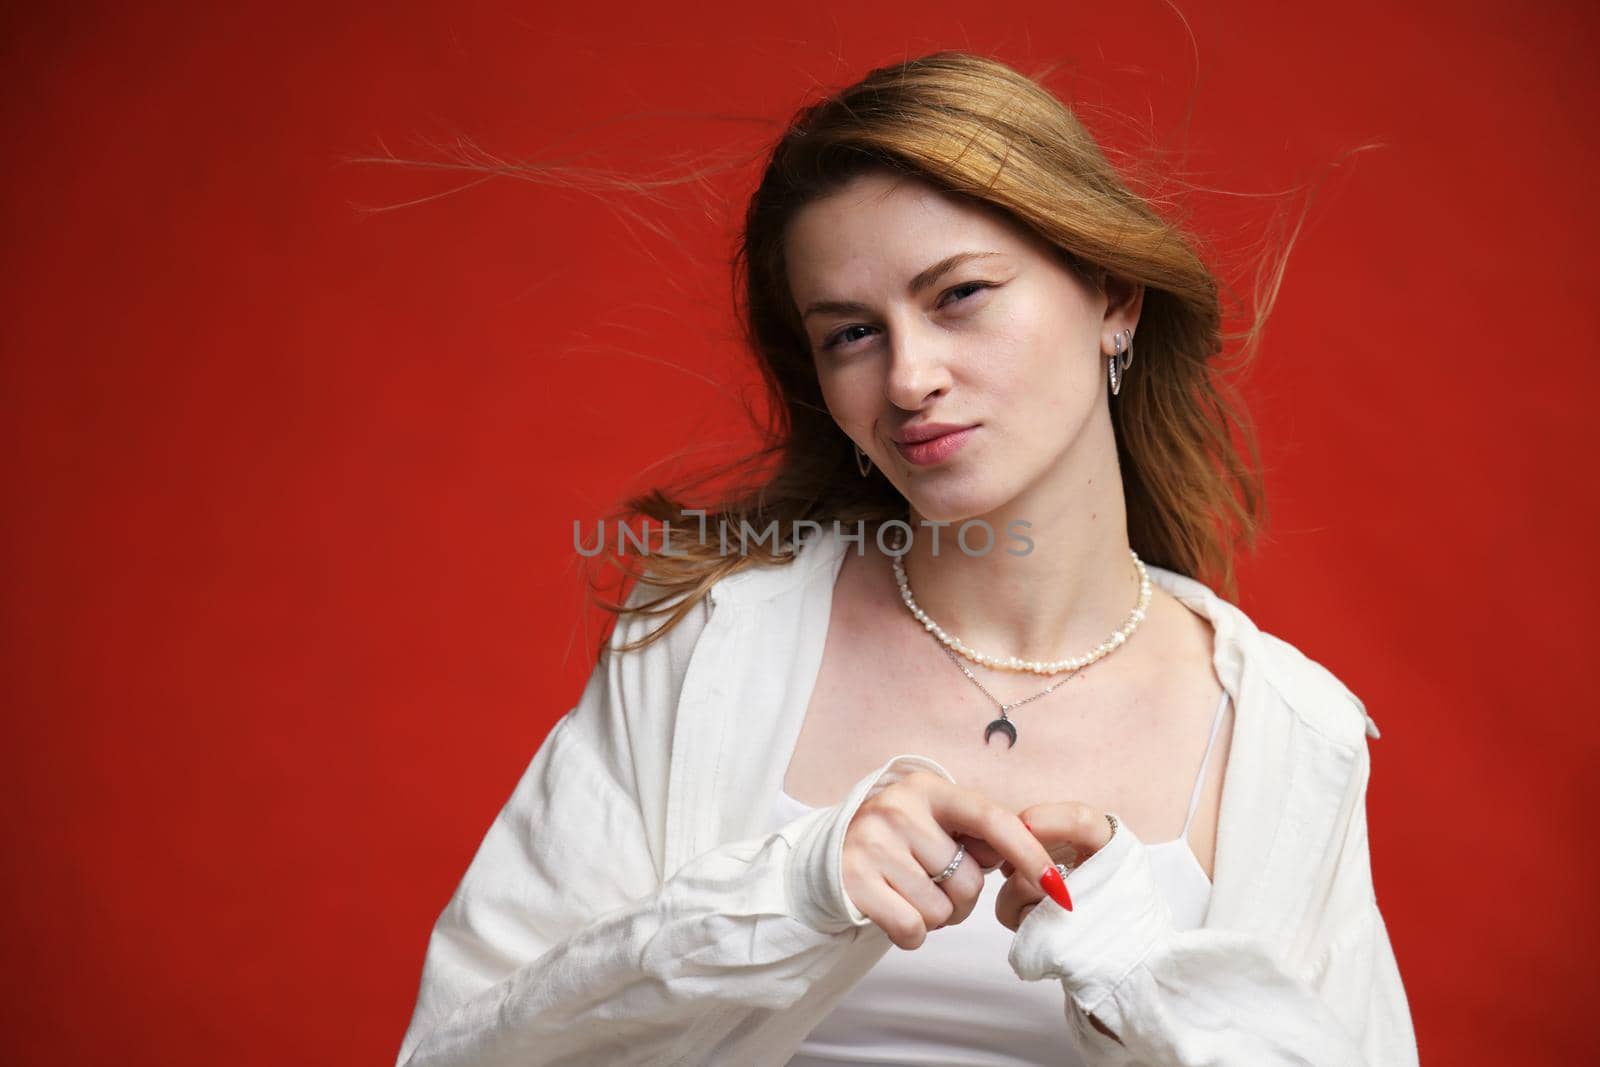 young european girl portrait on red background in studio